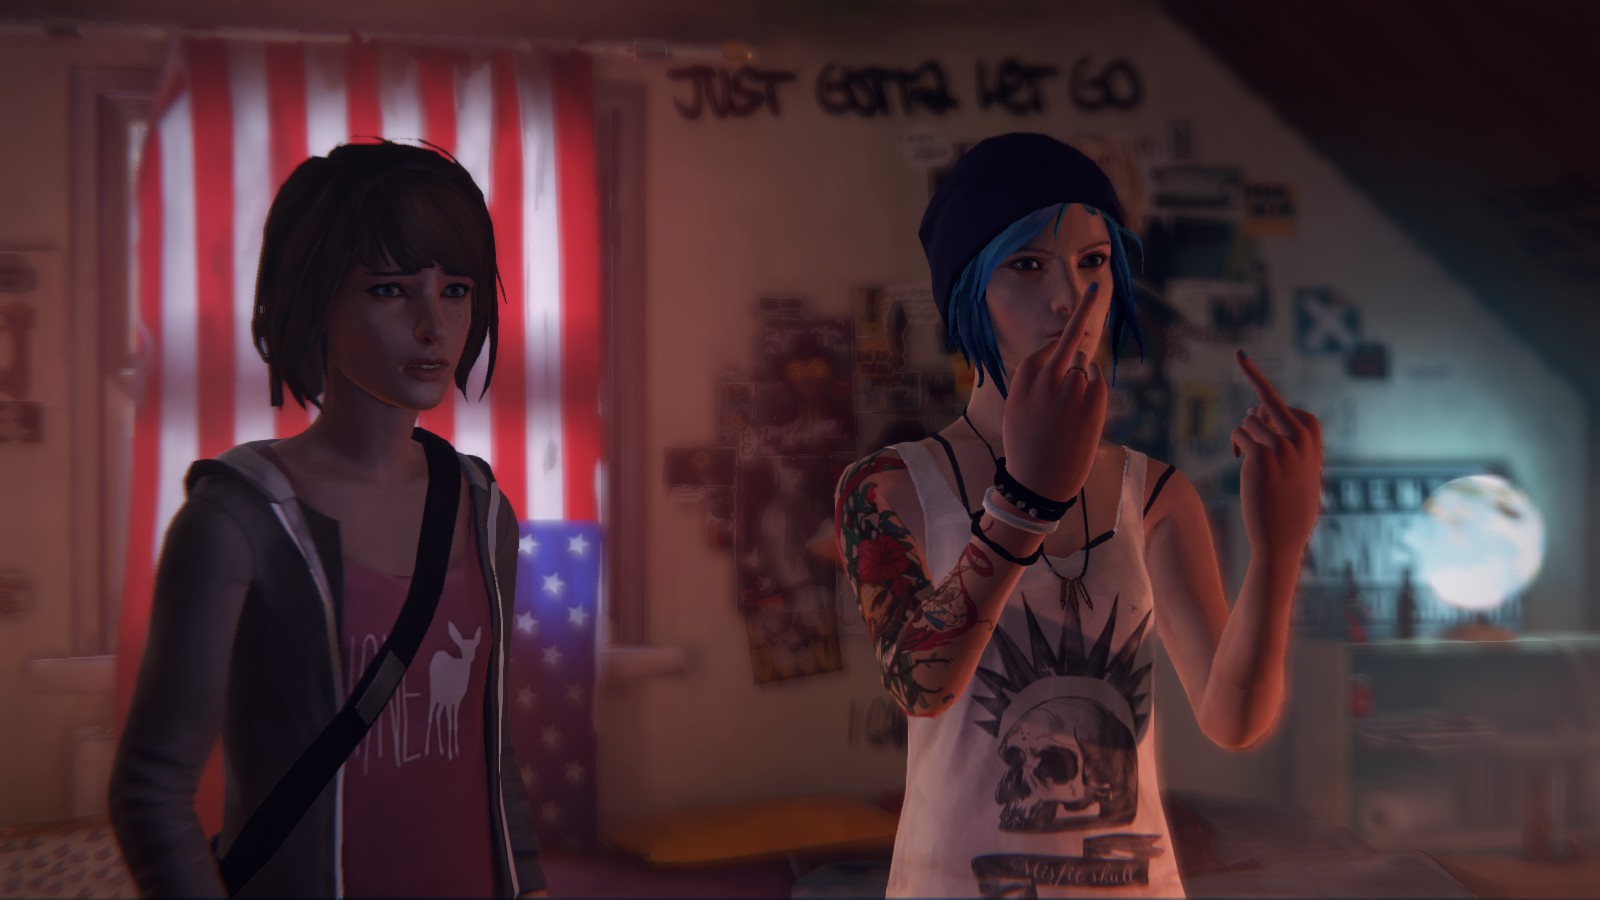 General 1600x900 Life Is Strange Price House Max Caulfield Chloe Price video games video game characters